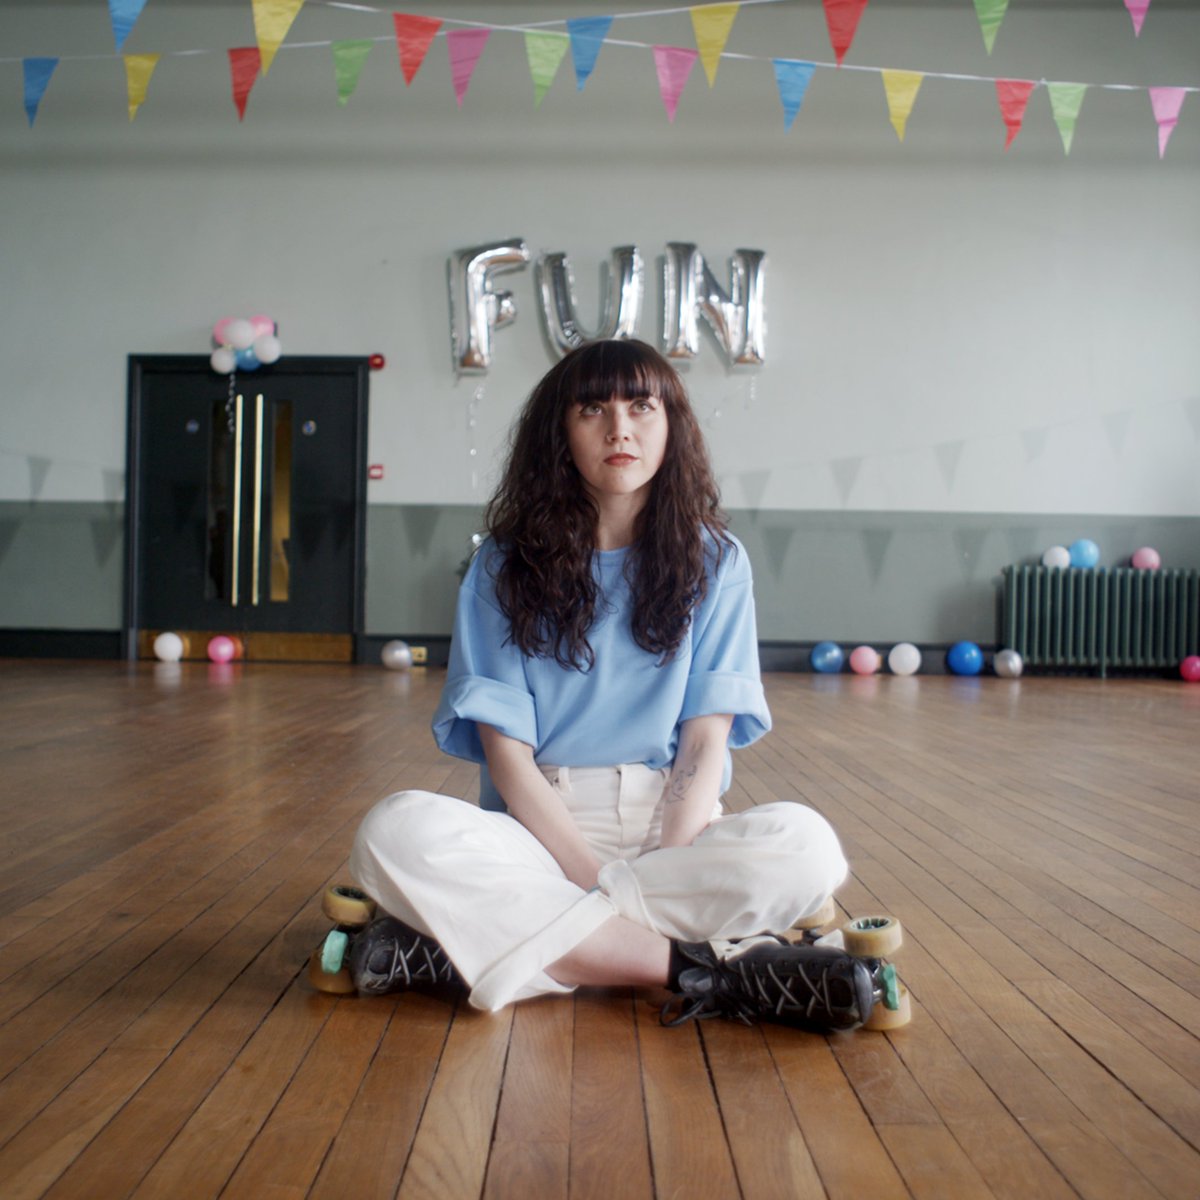 NARC. ONLINE: Francesca Pidgeon from alt-pop outfit Dilettante, who have recently dropped their new single Fun, tells us about the roller skating scene that she is a part of. 🪩 👀 narcmagazine.com/scene-dilettan…